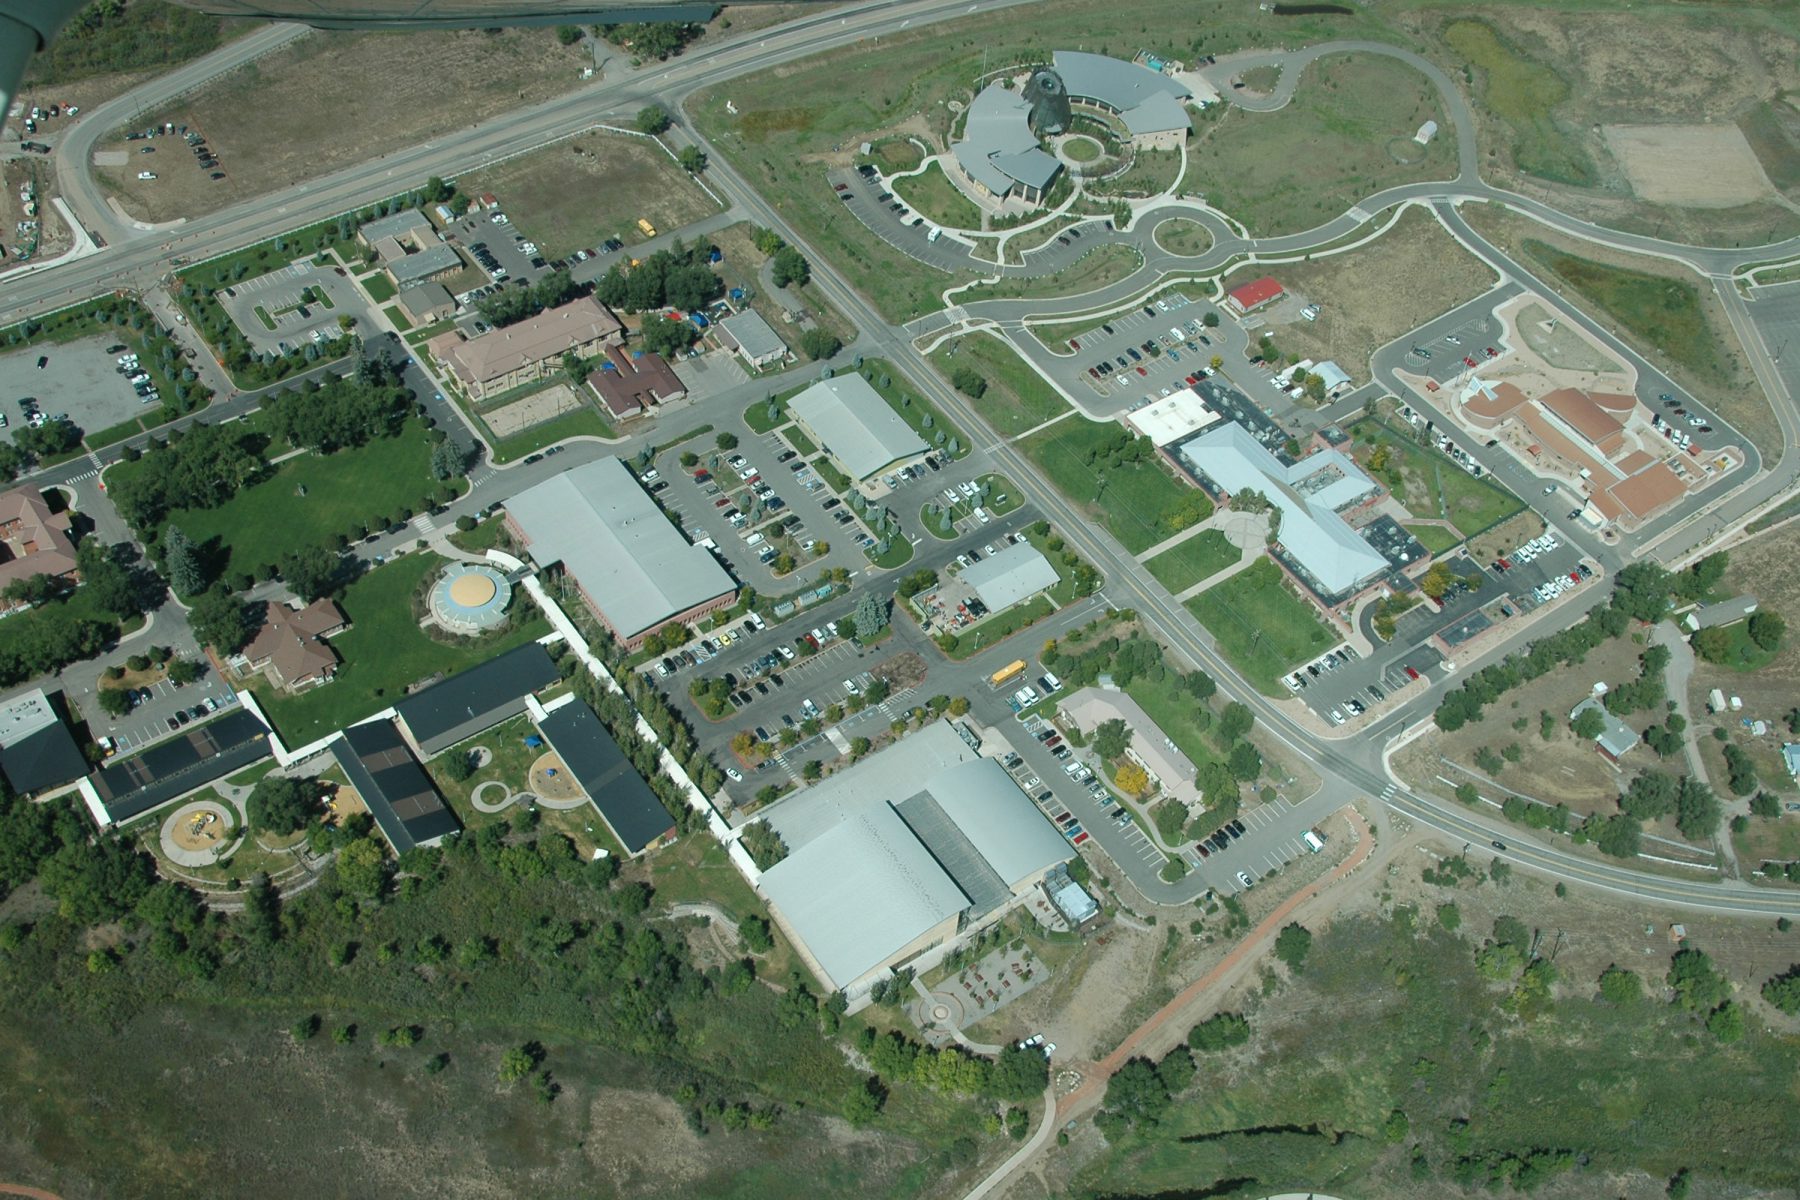 Southern Ute Tribal Campus